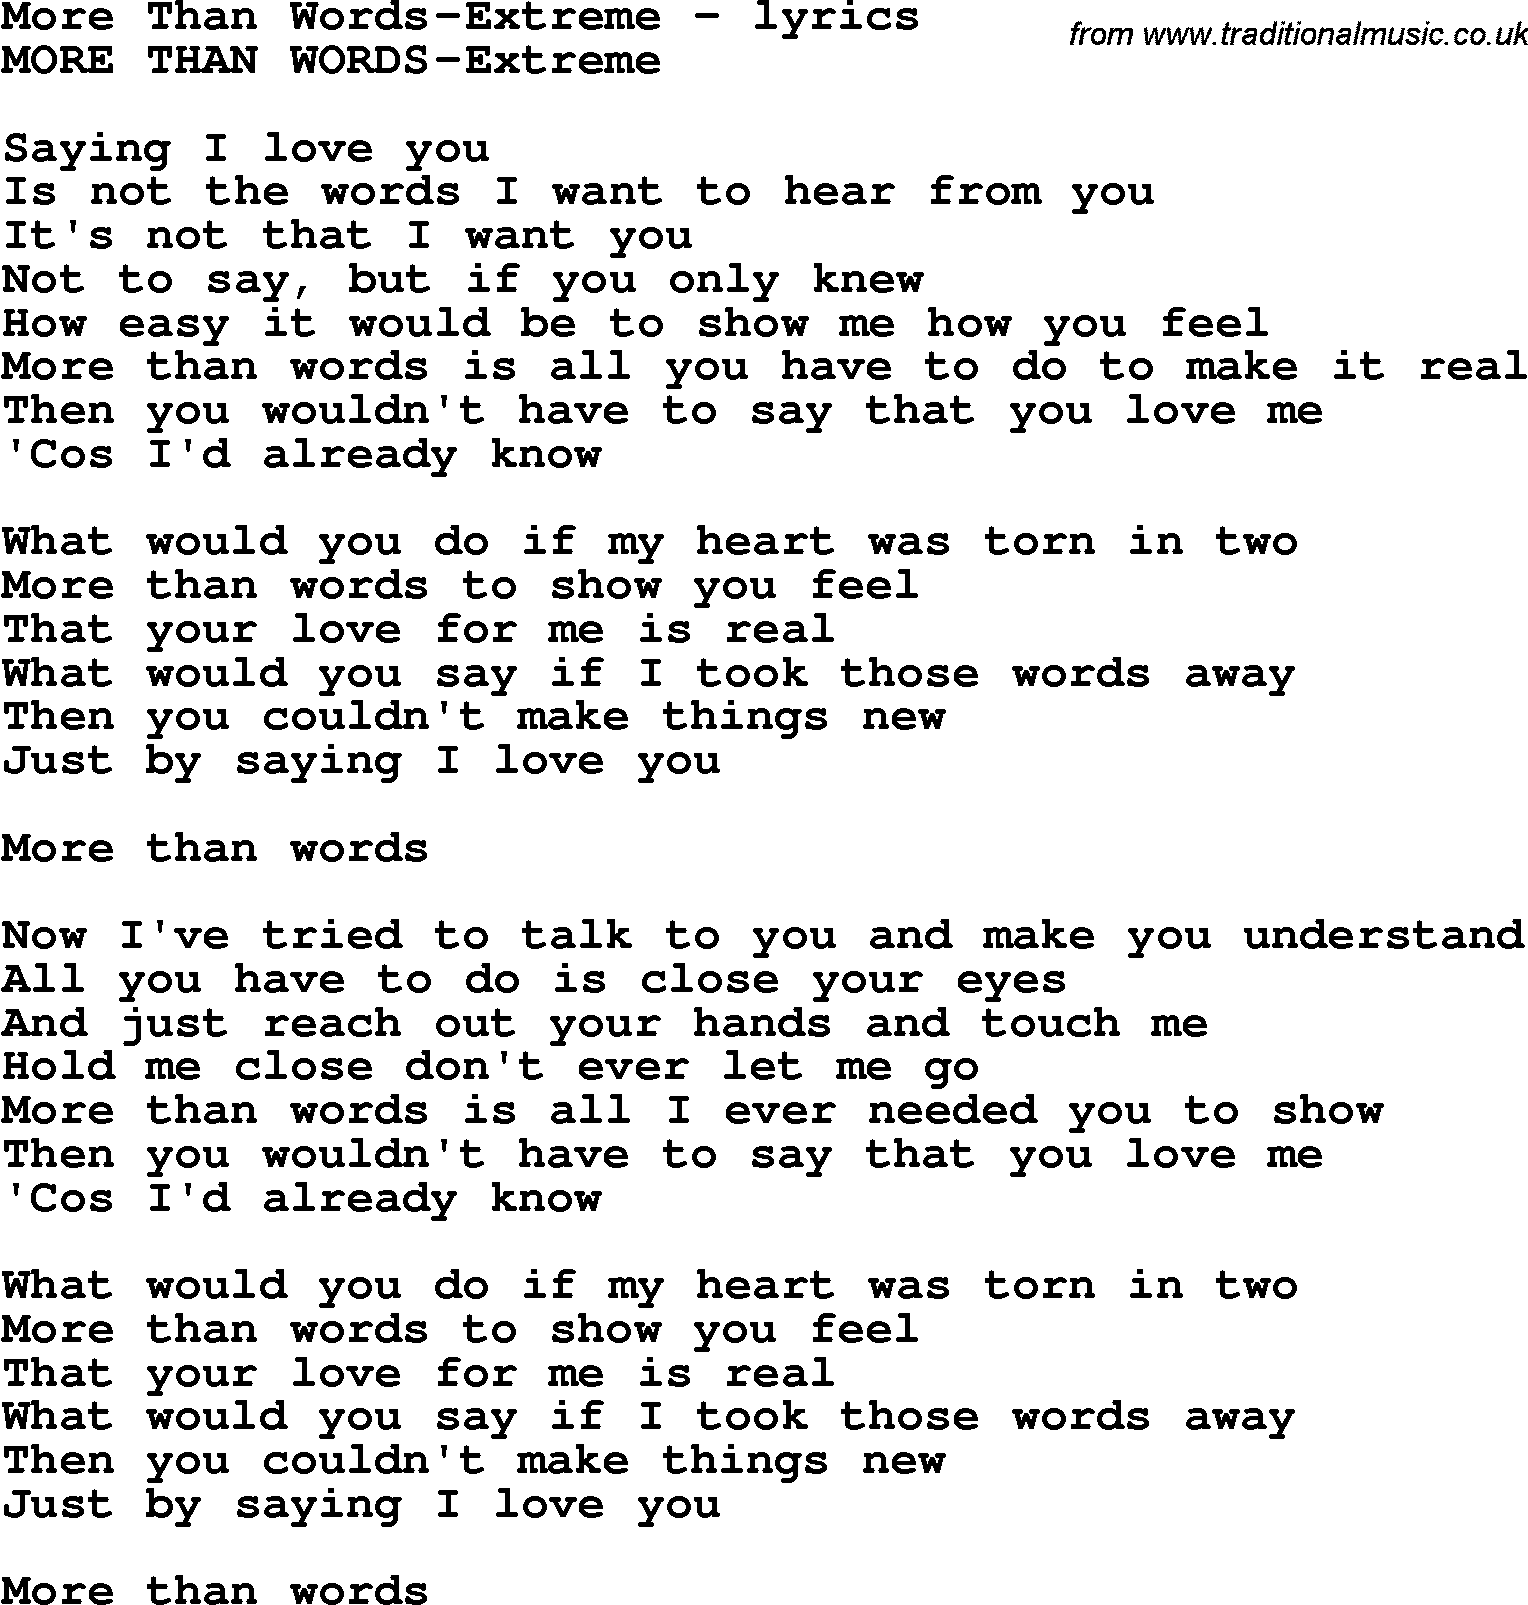 Love Song Lyrics for: More Than Words-Extreme